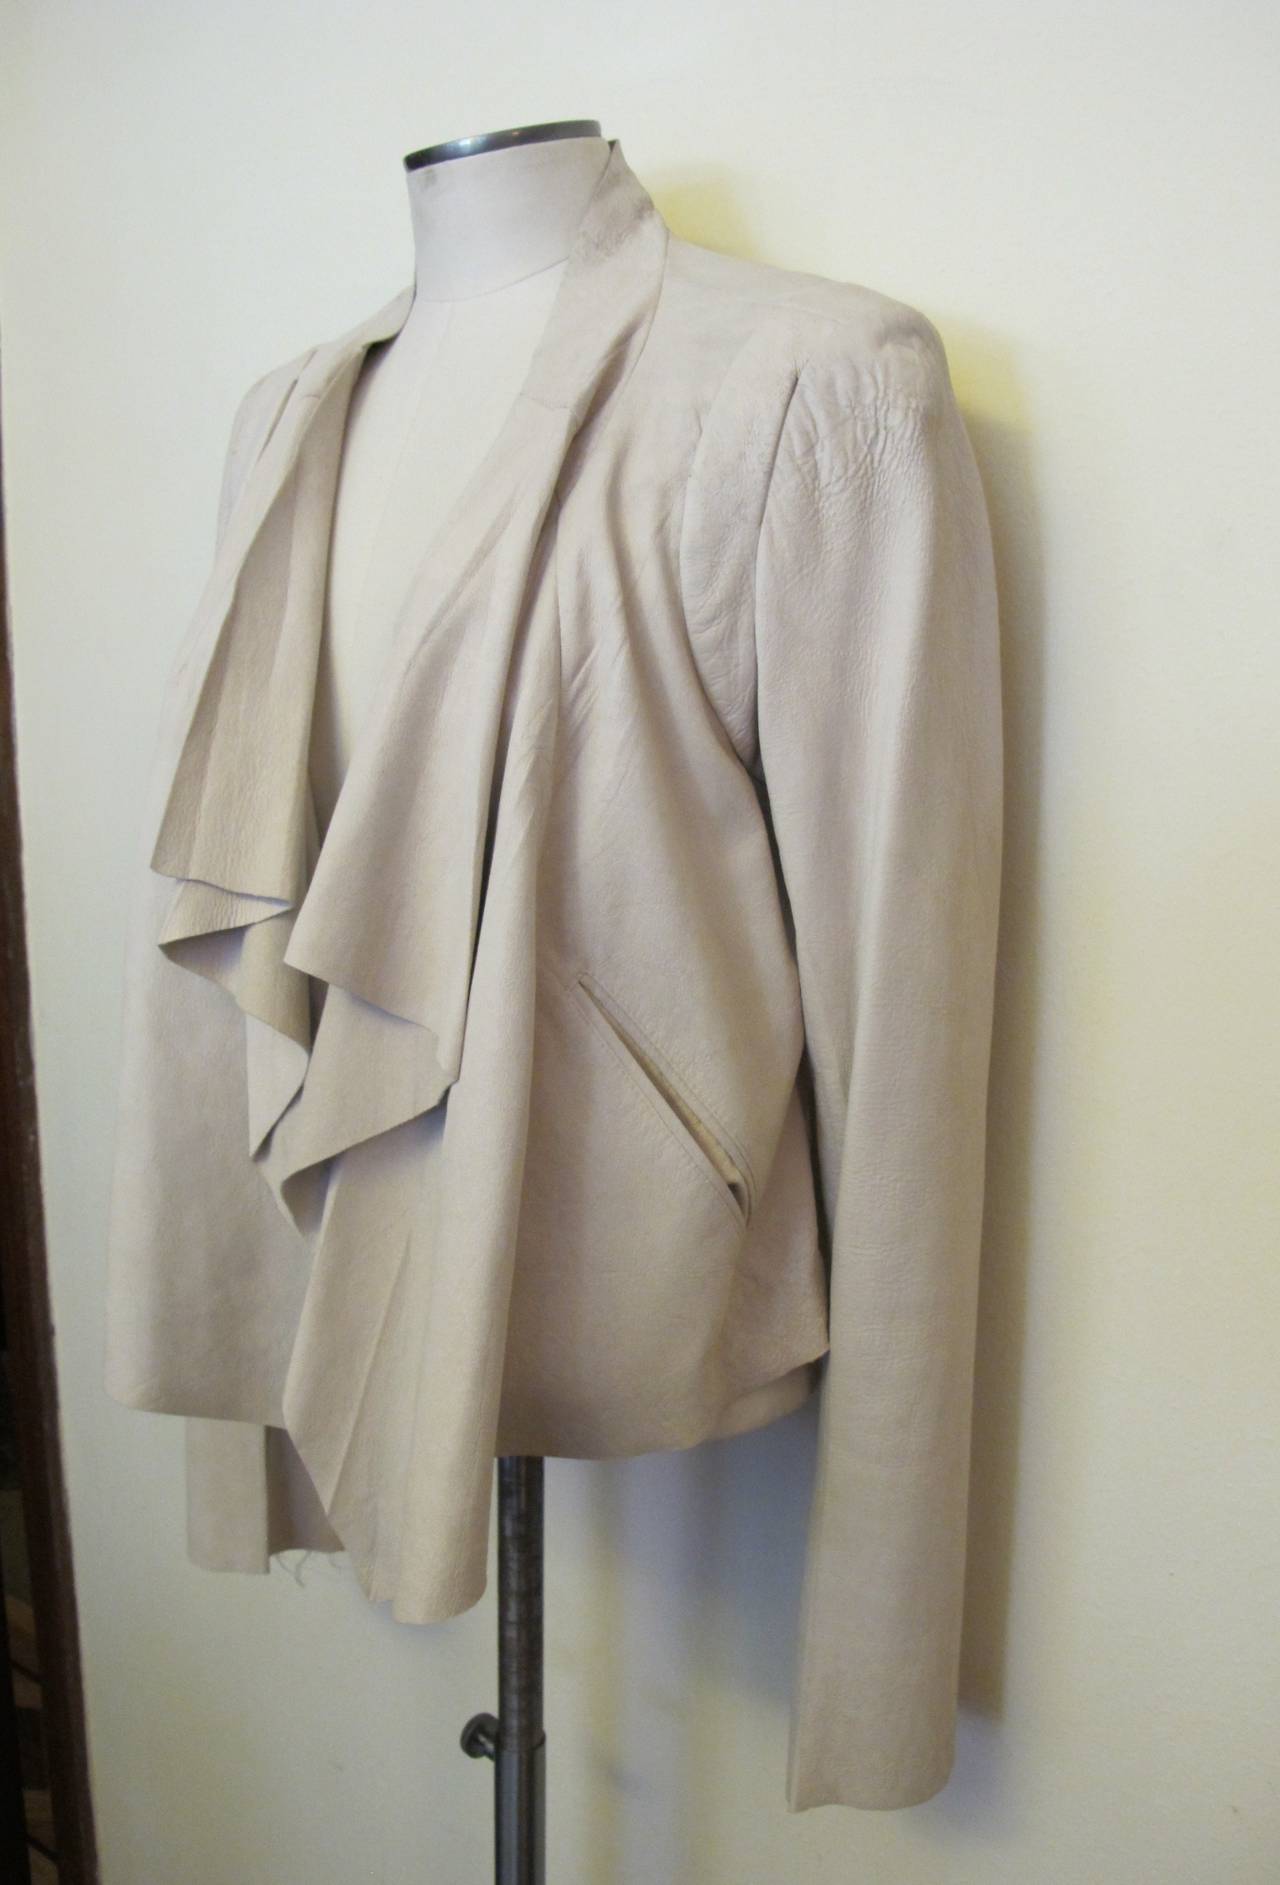 Elegant, chic light sand sheep leather asymmetrical jacket. It fits like a dream. The panels of the jacket cascade artfully down the front of the body. Back of the jacket measures 18 inches long. Longest part of jacket measures 23.5 inches. Sleeve